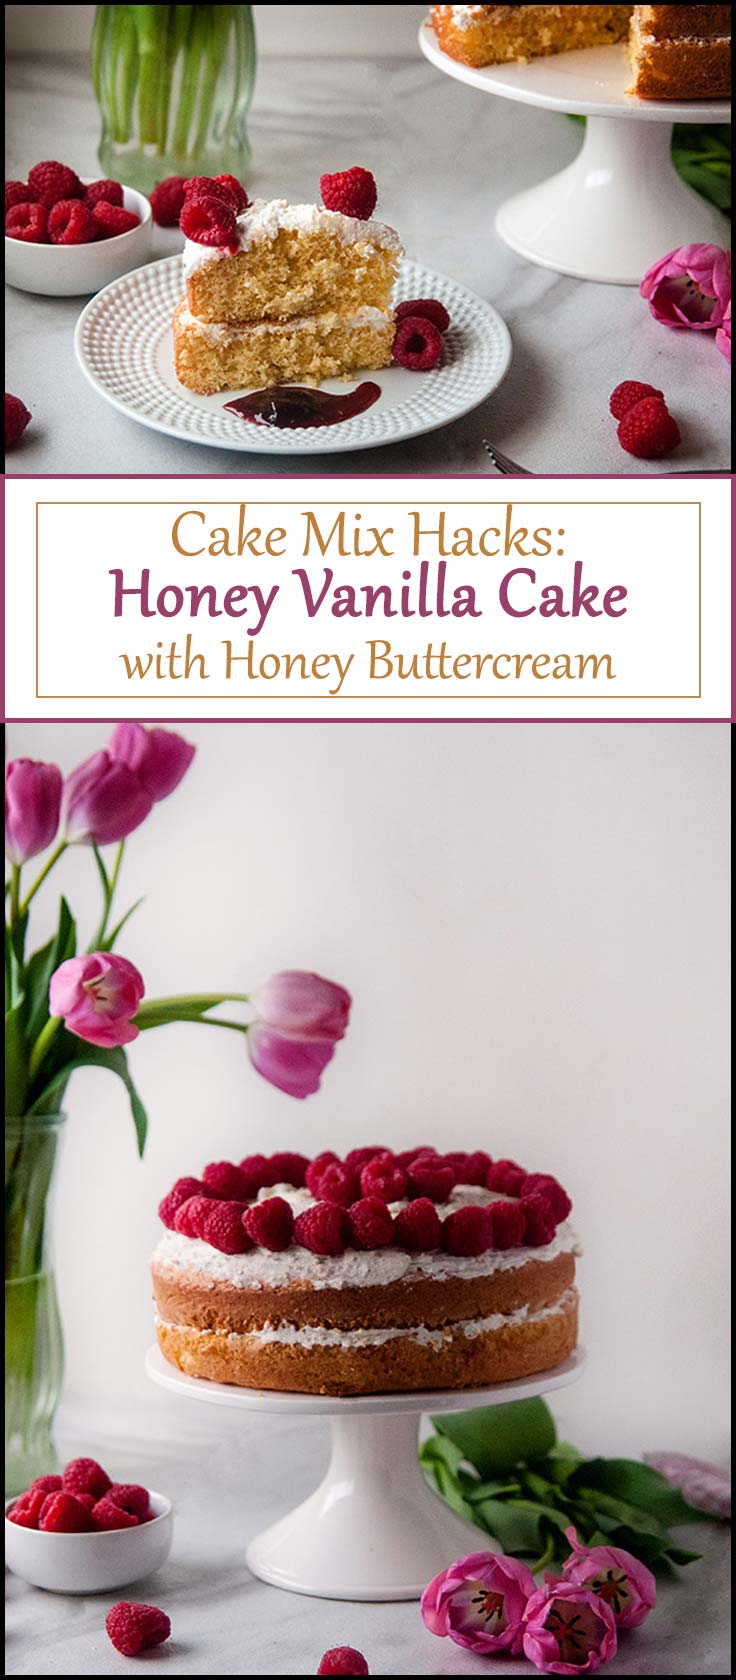 Cake Mix Hacks: Honey Vanilla Cake with Honey Buttercream is an easy springtime cake that makes the perfect easy dessert recipe for any occassion from www.seasonedsprinkles.com